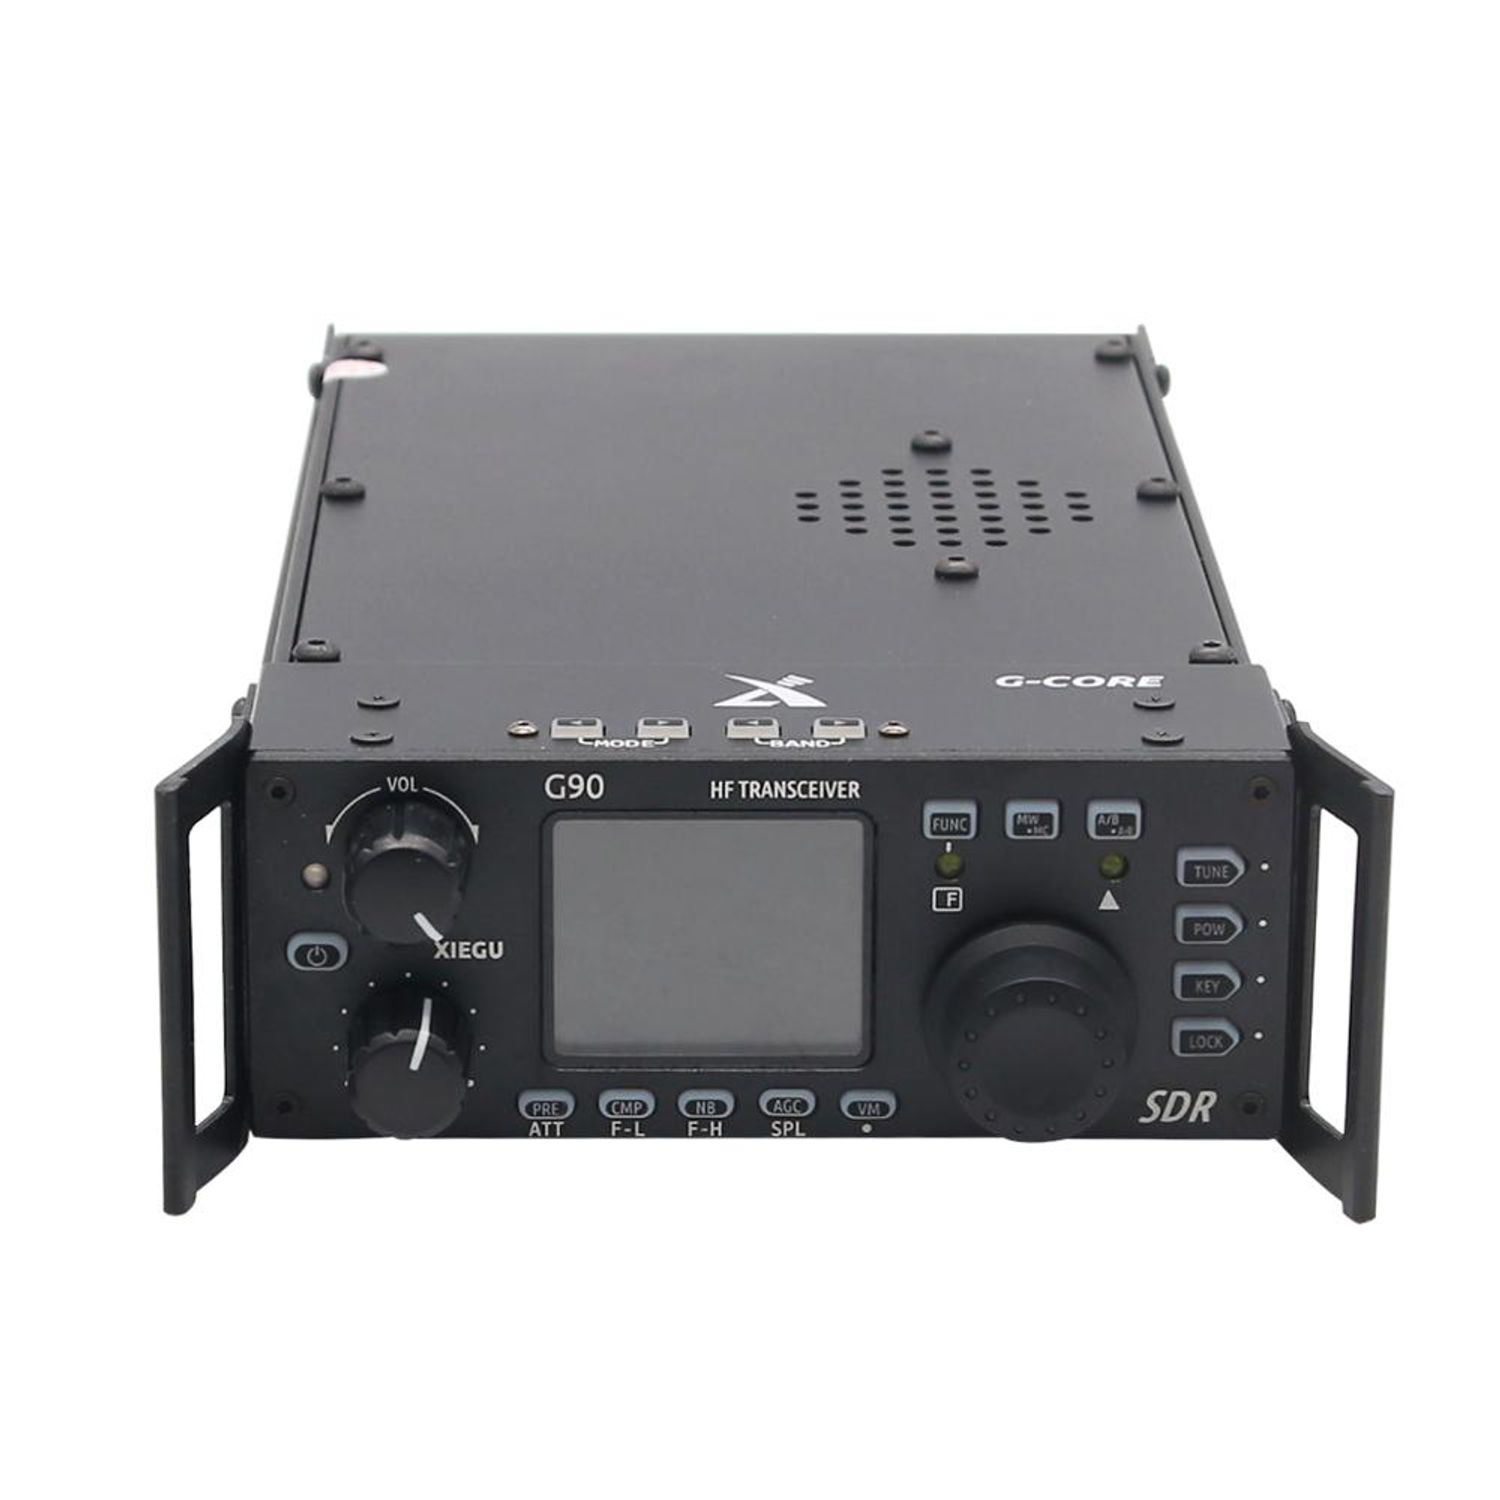 The G90 transceiver is shown from the front view, sitting flat, with its display screen off and multiple control knobs and buttons visible on the front panel